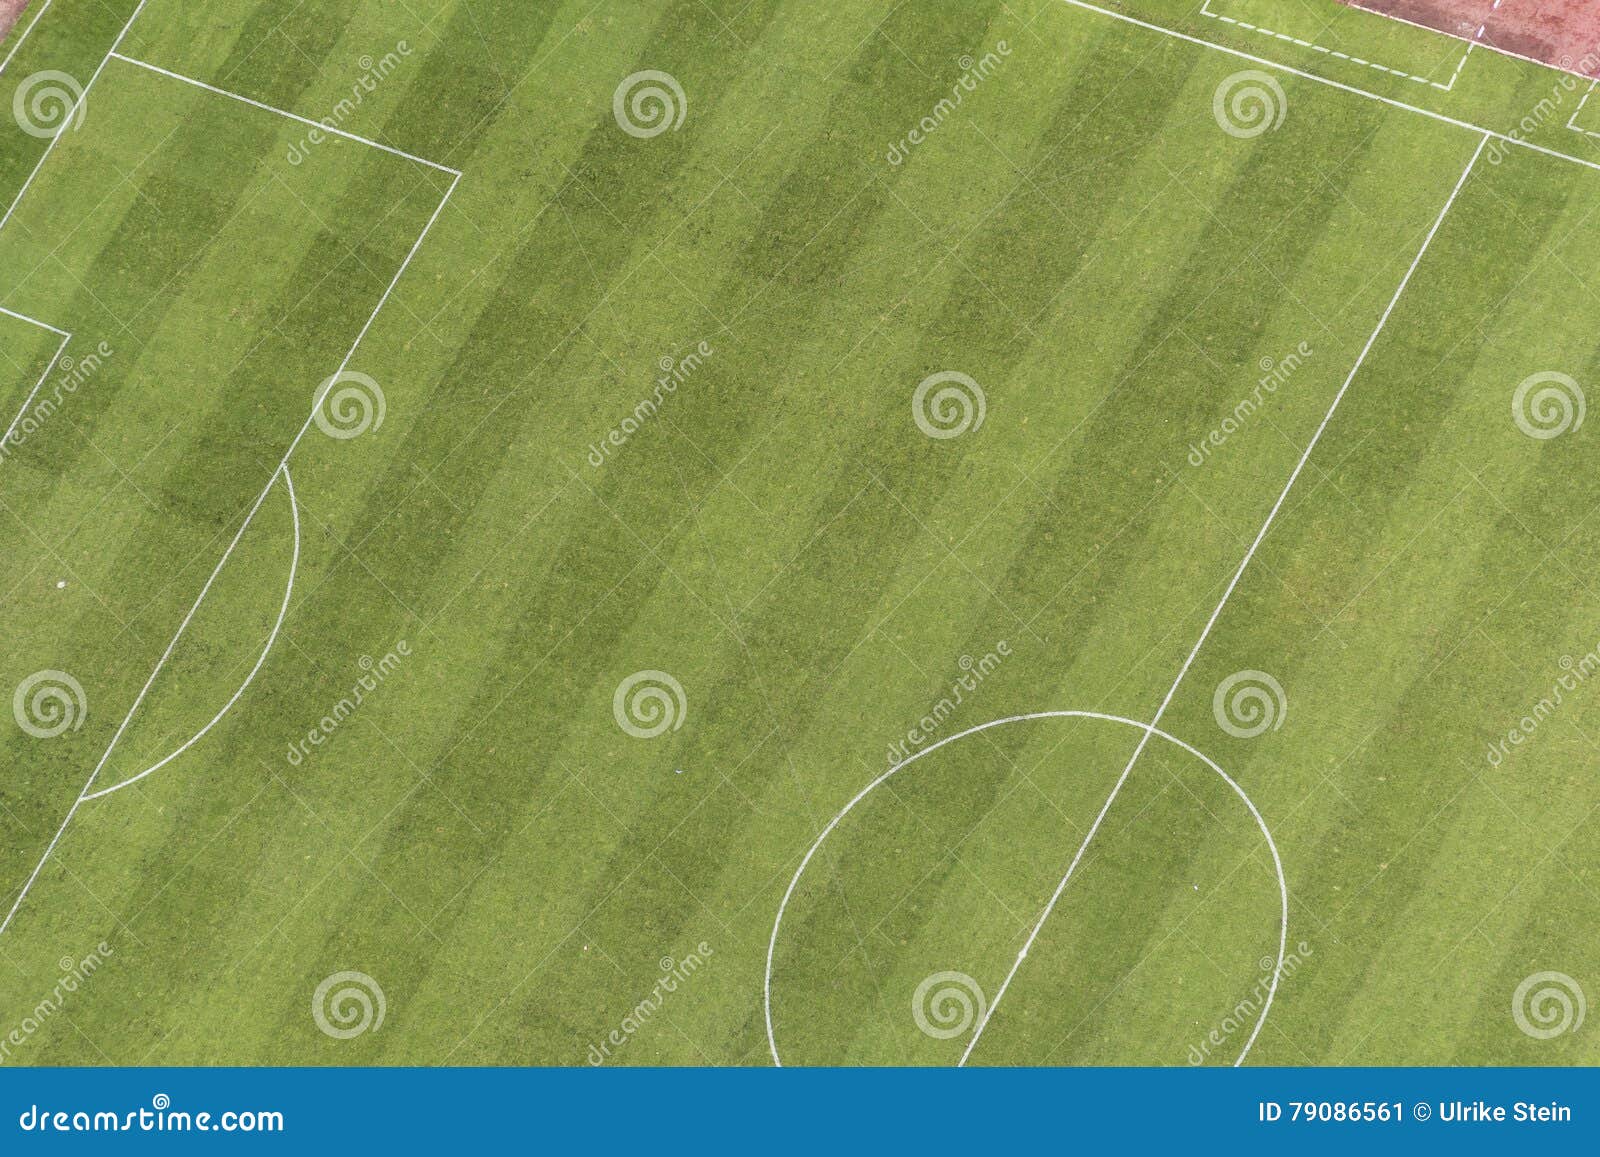 aerial view of football sport field